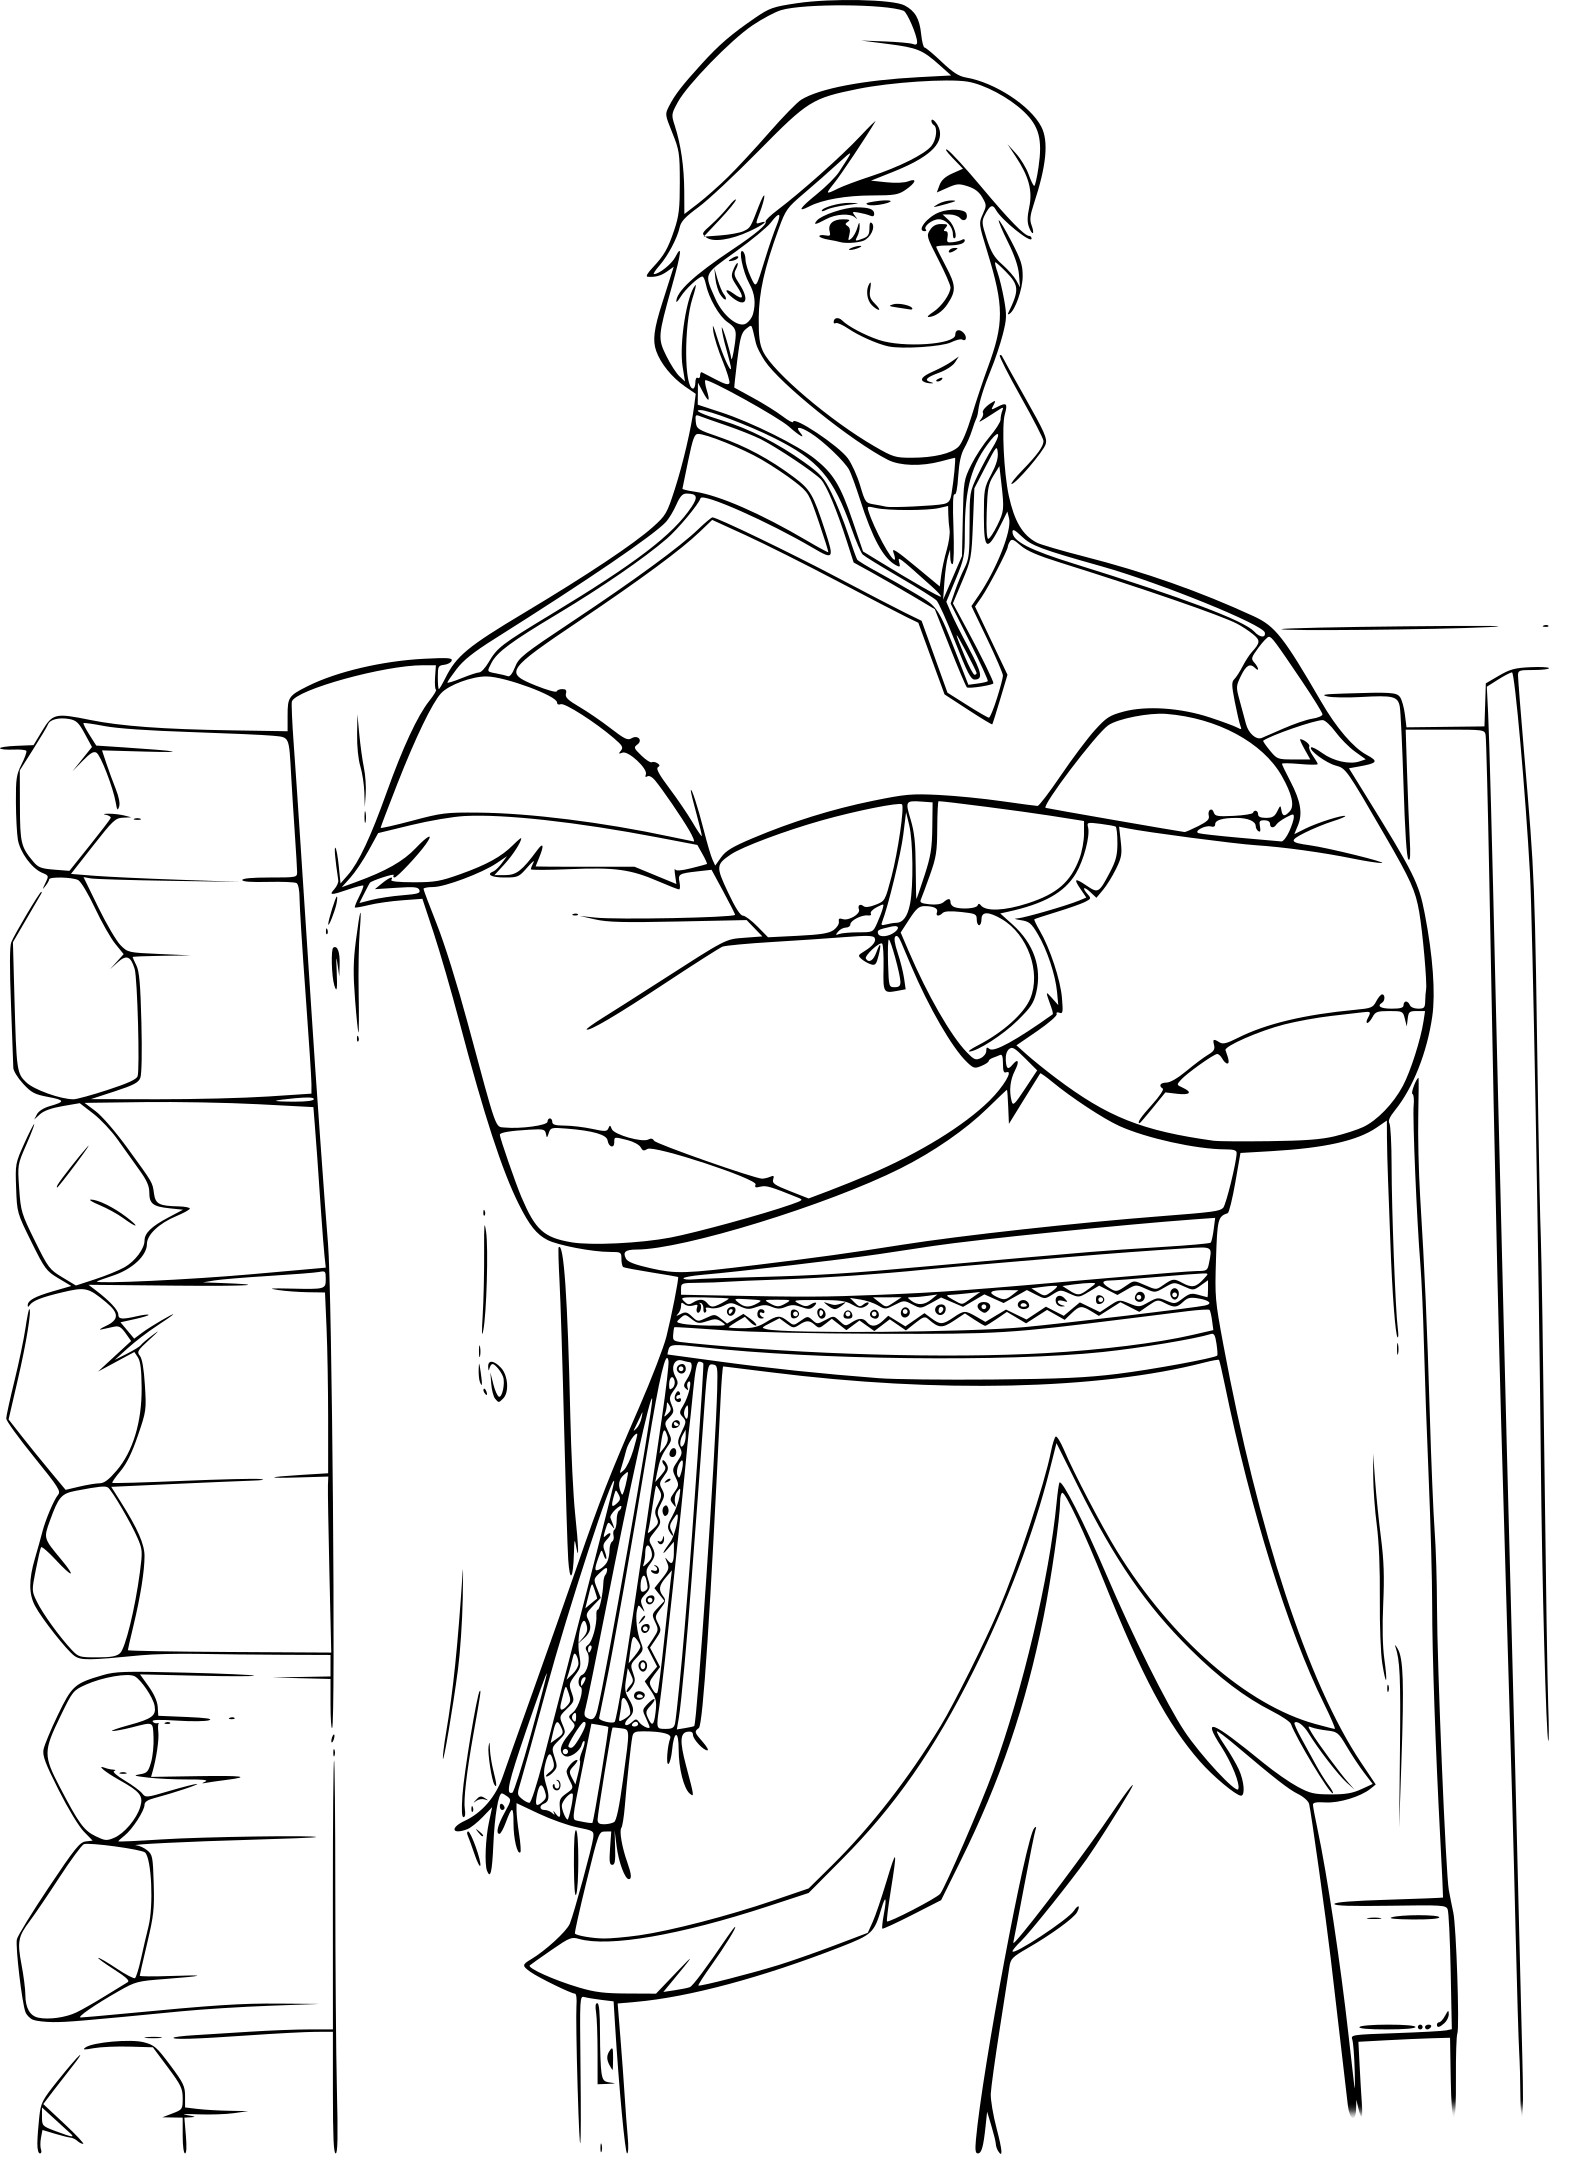 Frozen Kristoff coloring page